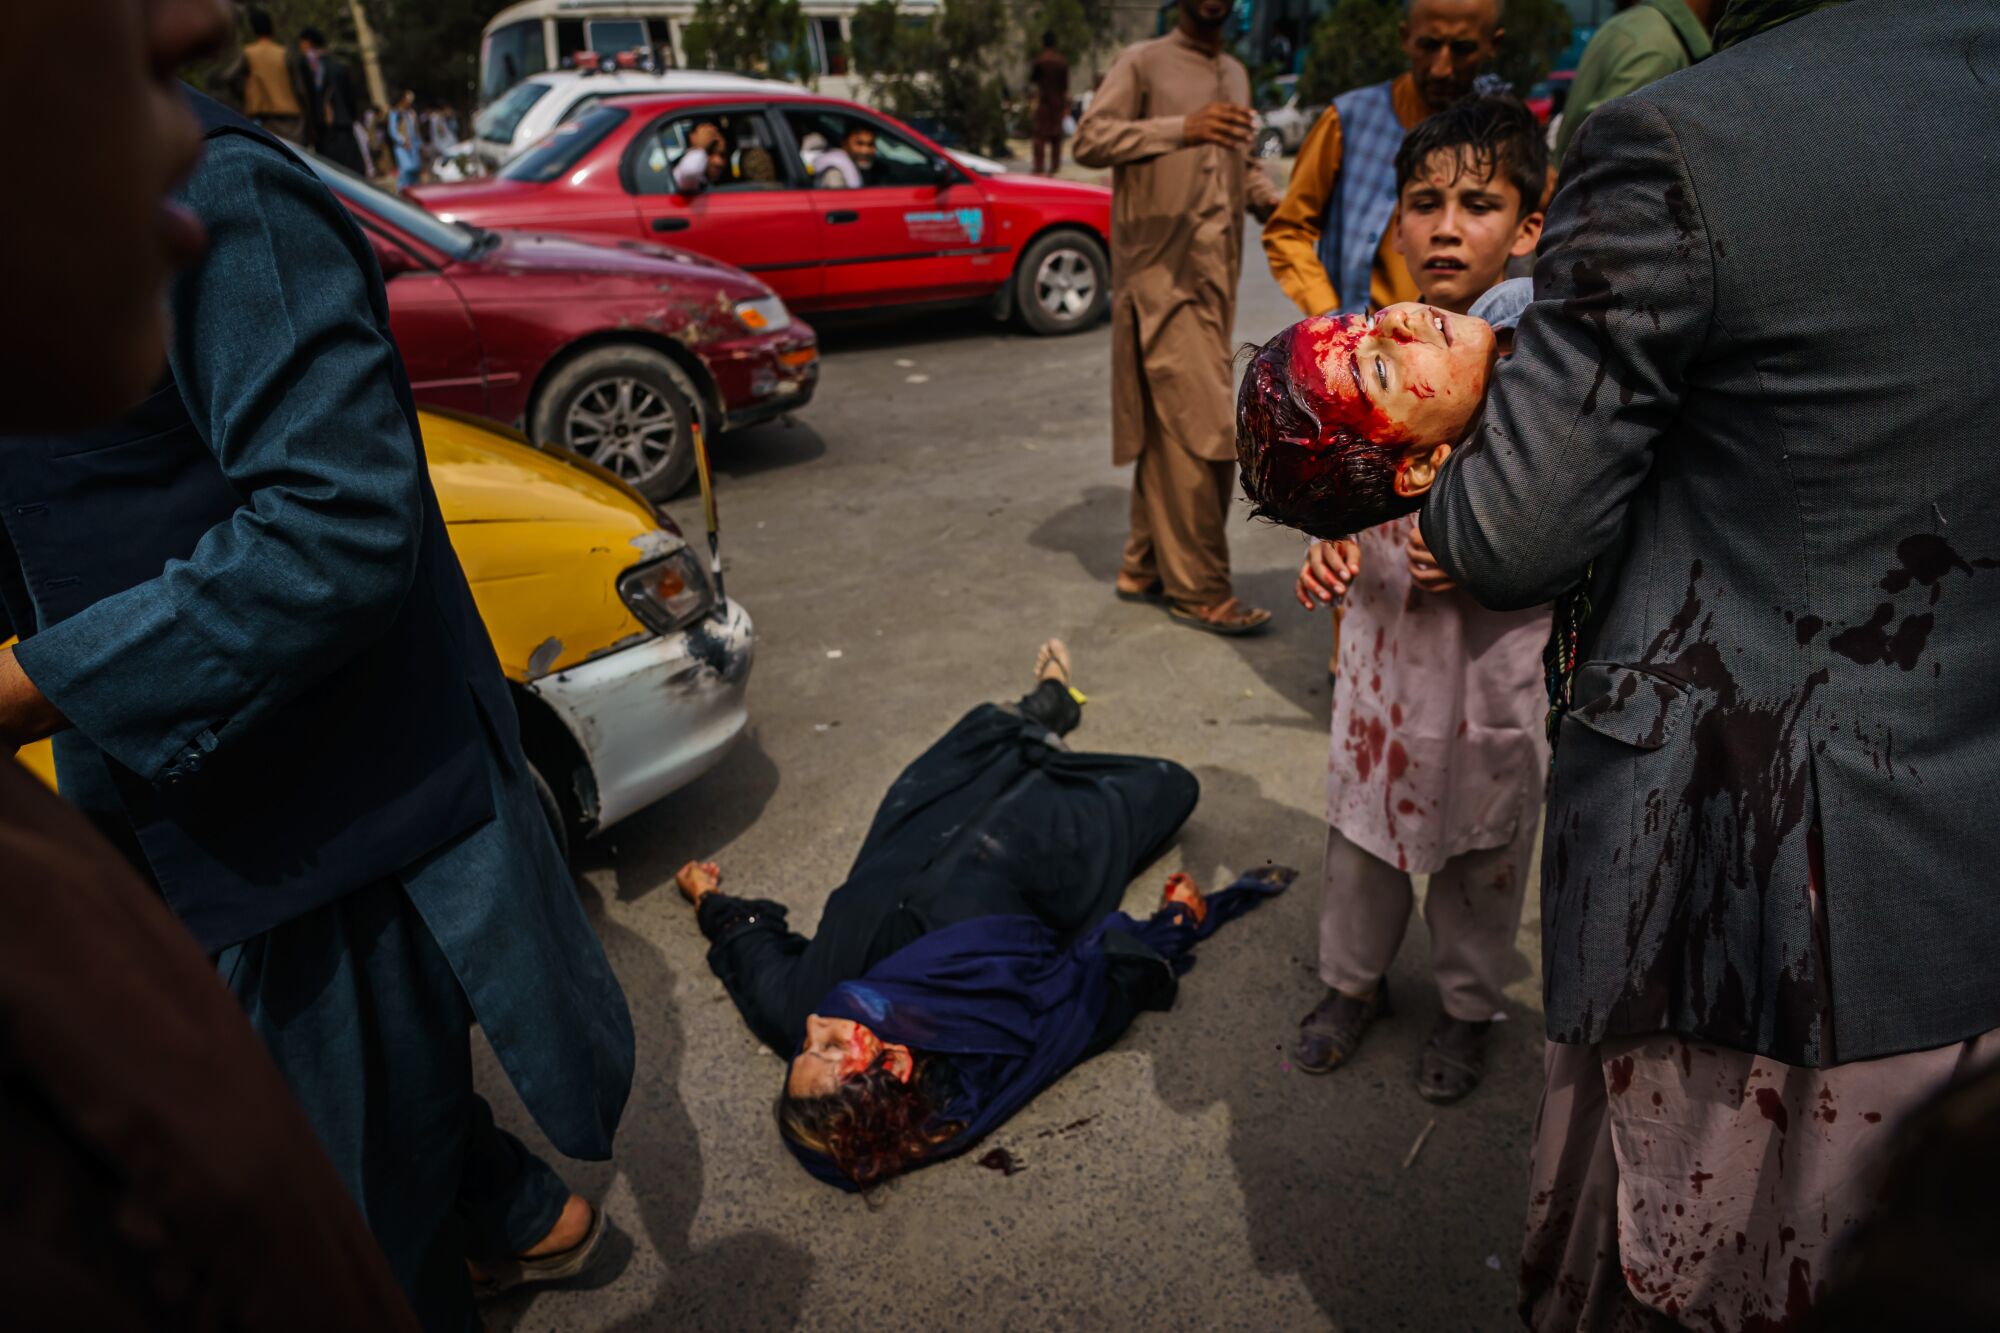 A man carries a bloodied child as a woman lies wounded in Afghanistan.